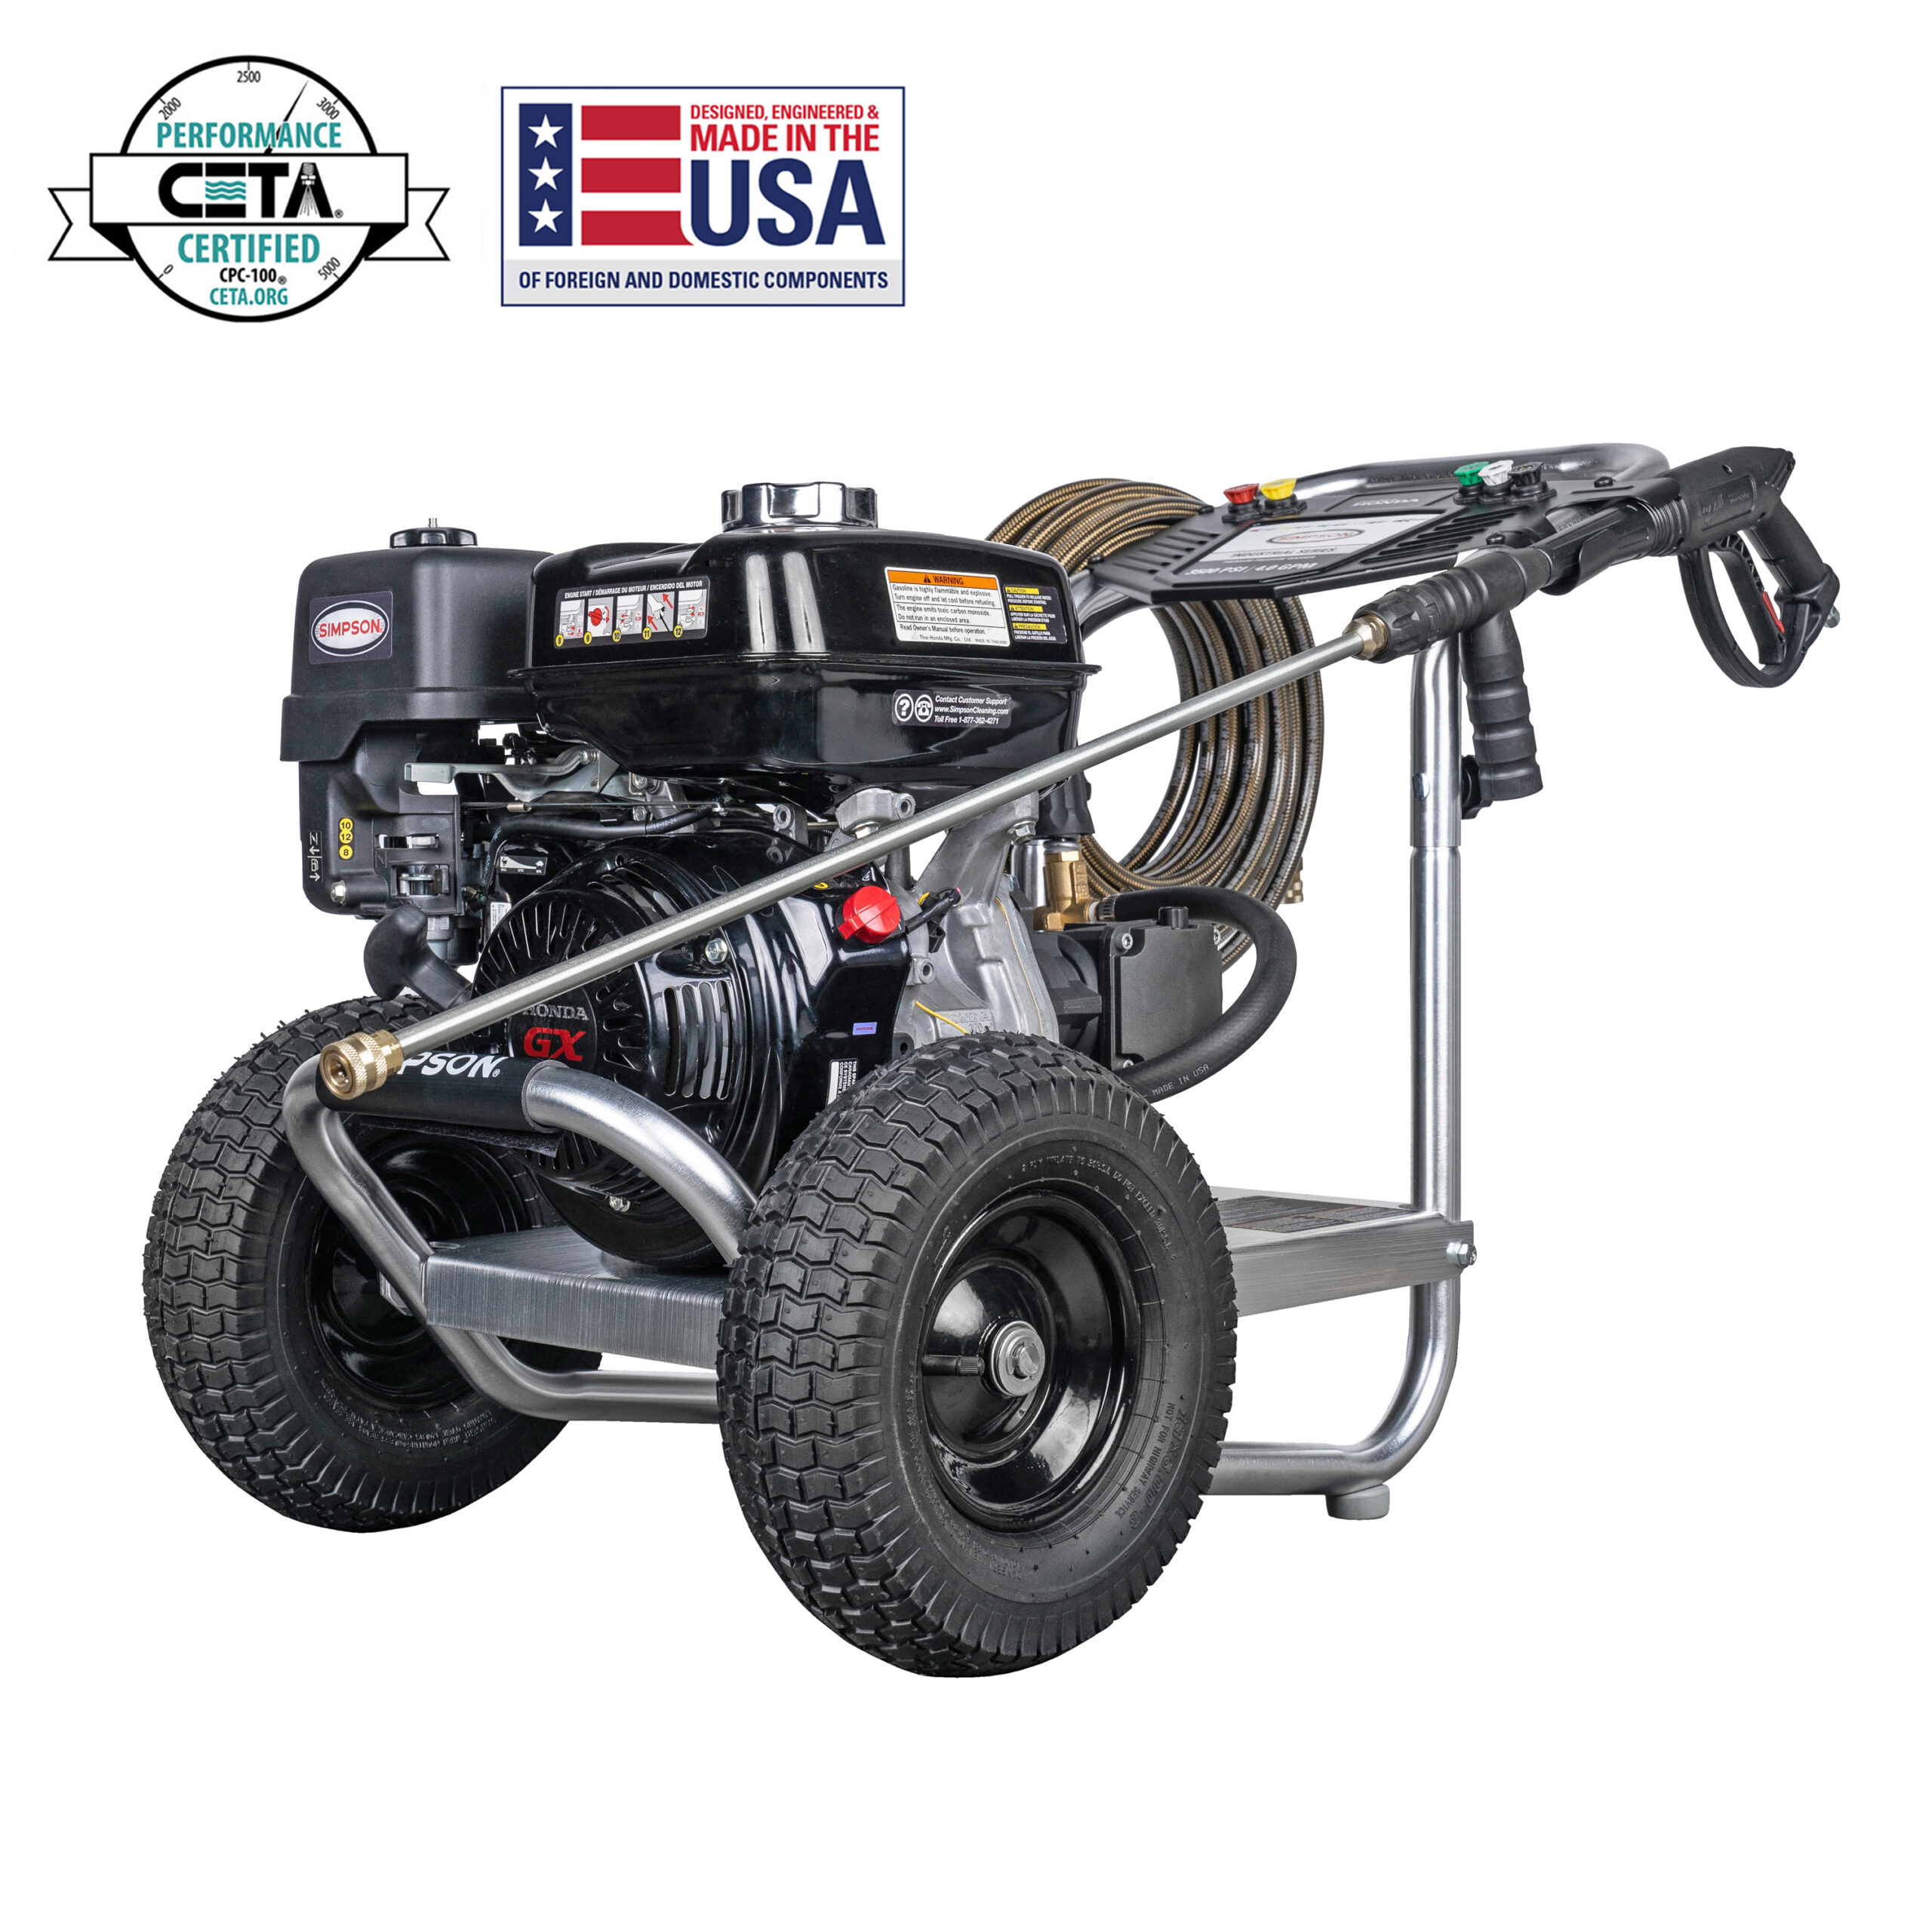 Industrial Cleaning Equipment, Industrial Pressure Washers